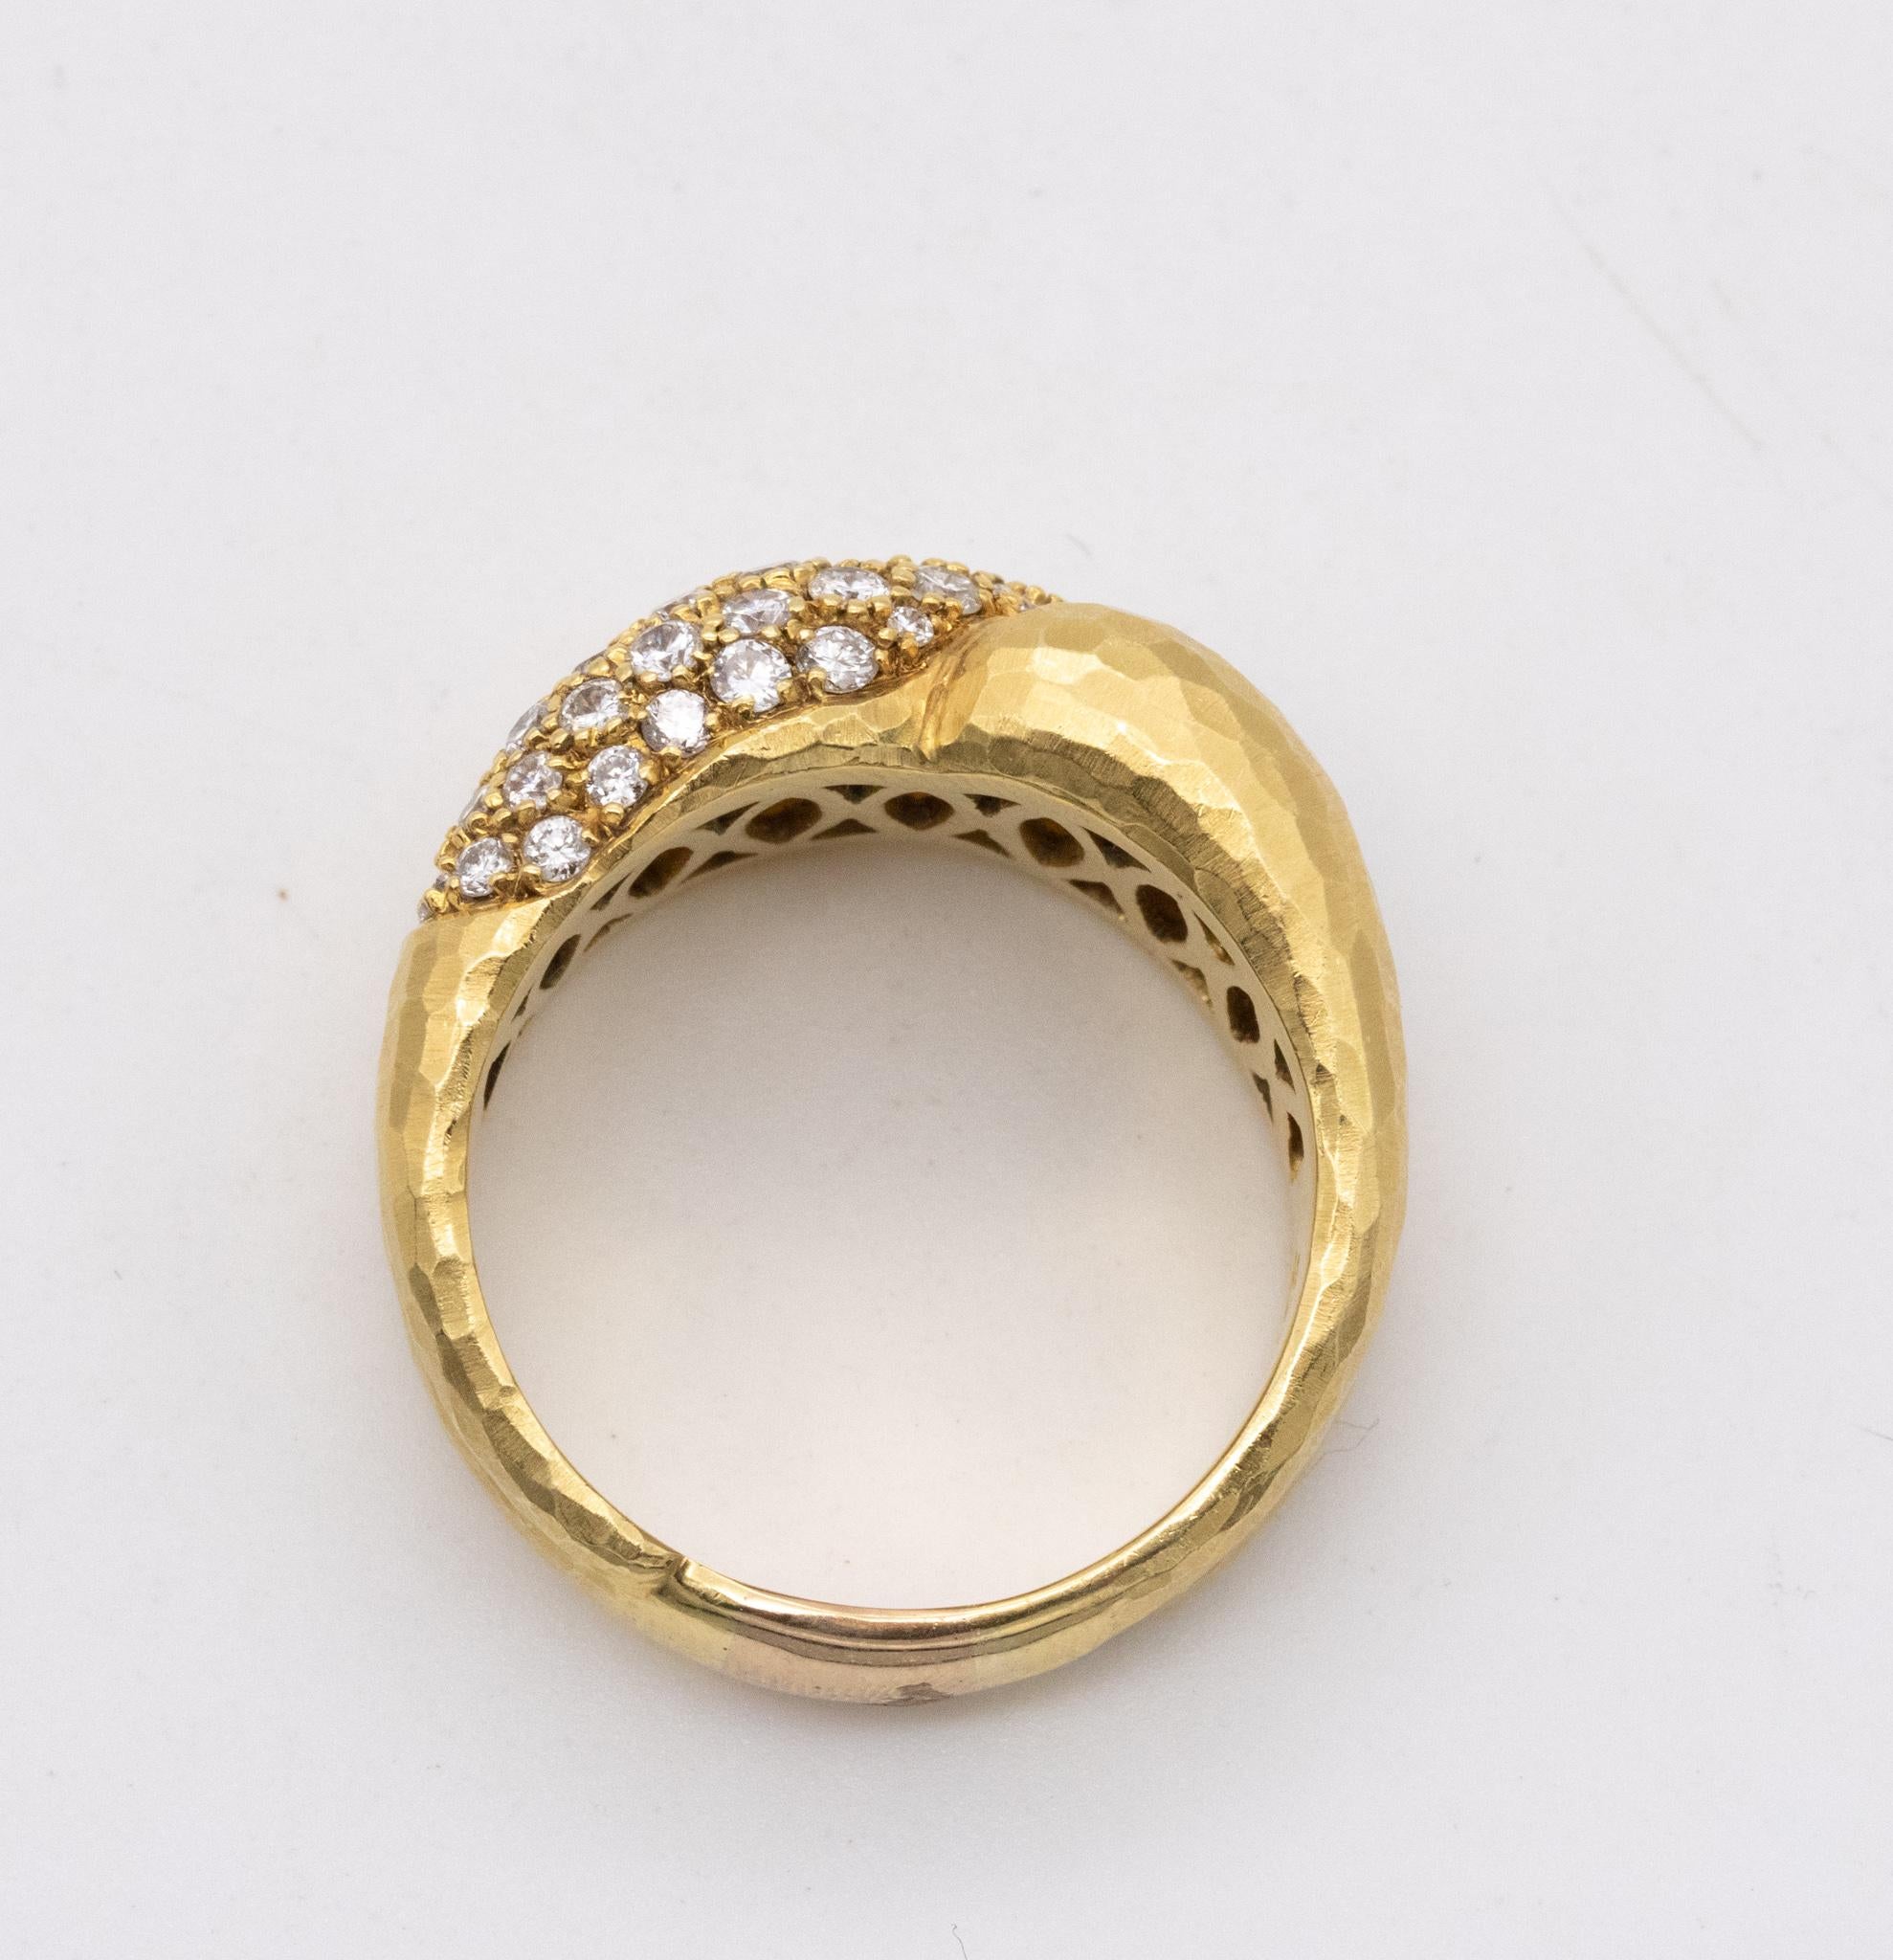 Brilliant Cut Andrew Grima Rare Hammered Ring in 18Kt Yellow Gold with 1.50 Ctw in VS Diamonds